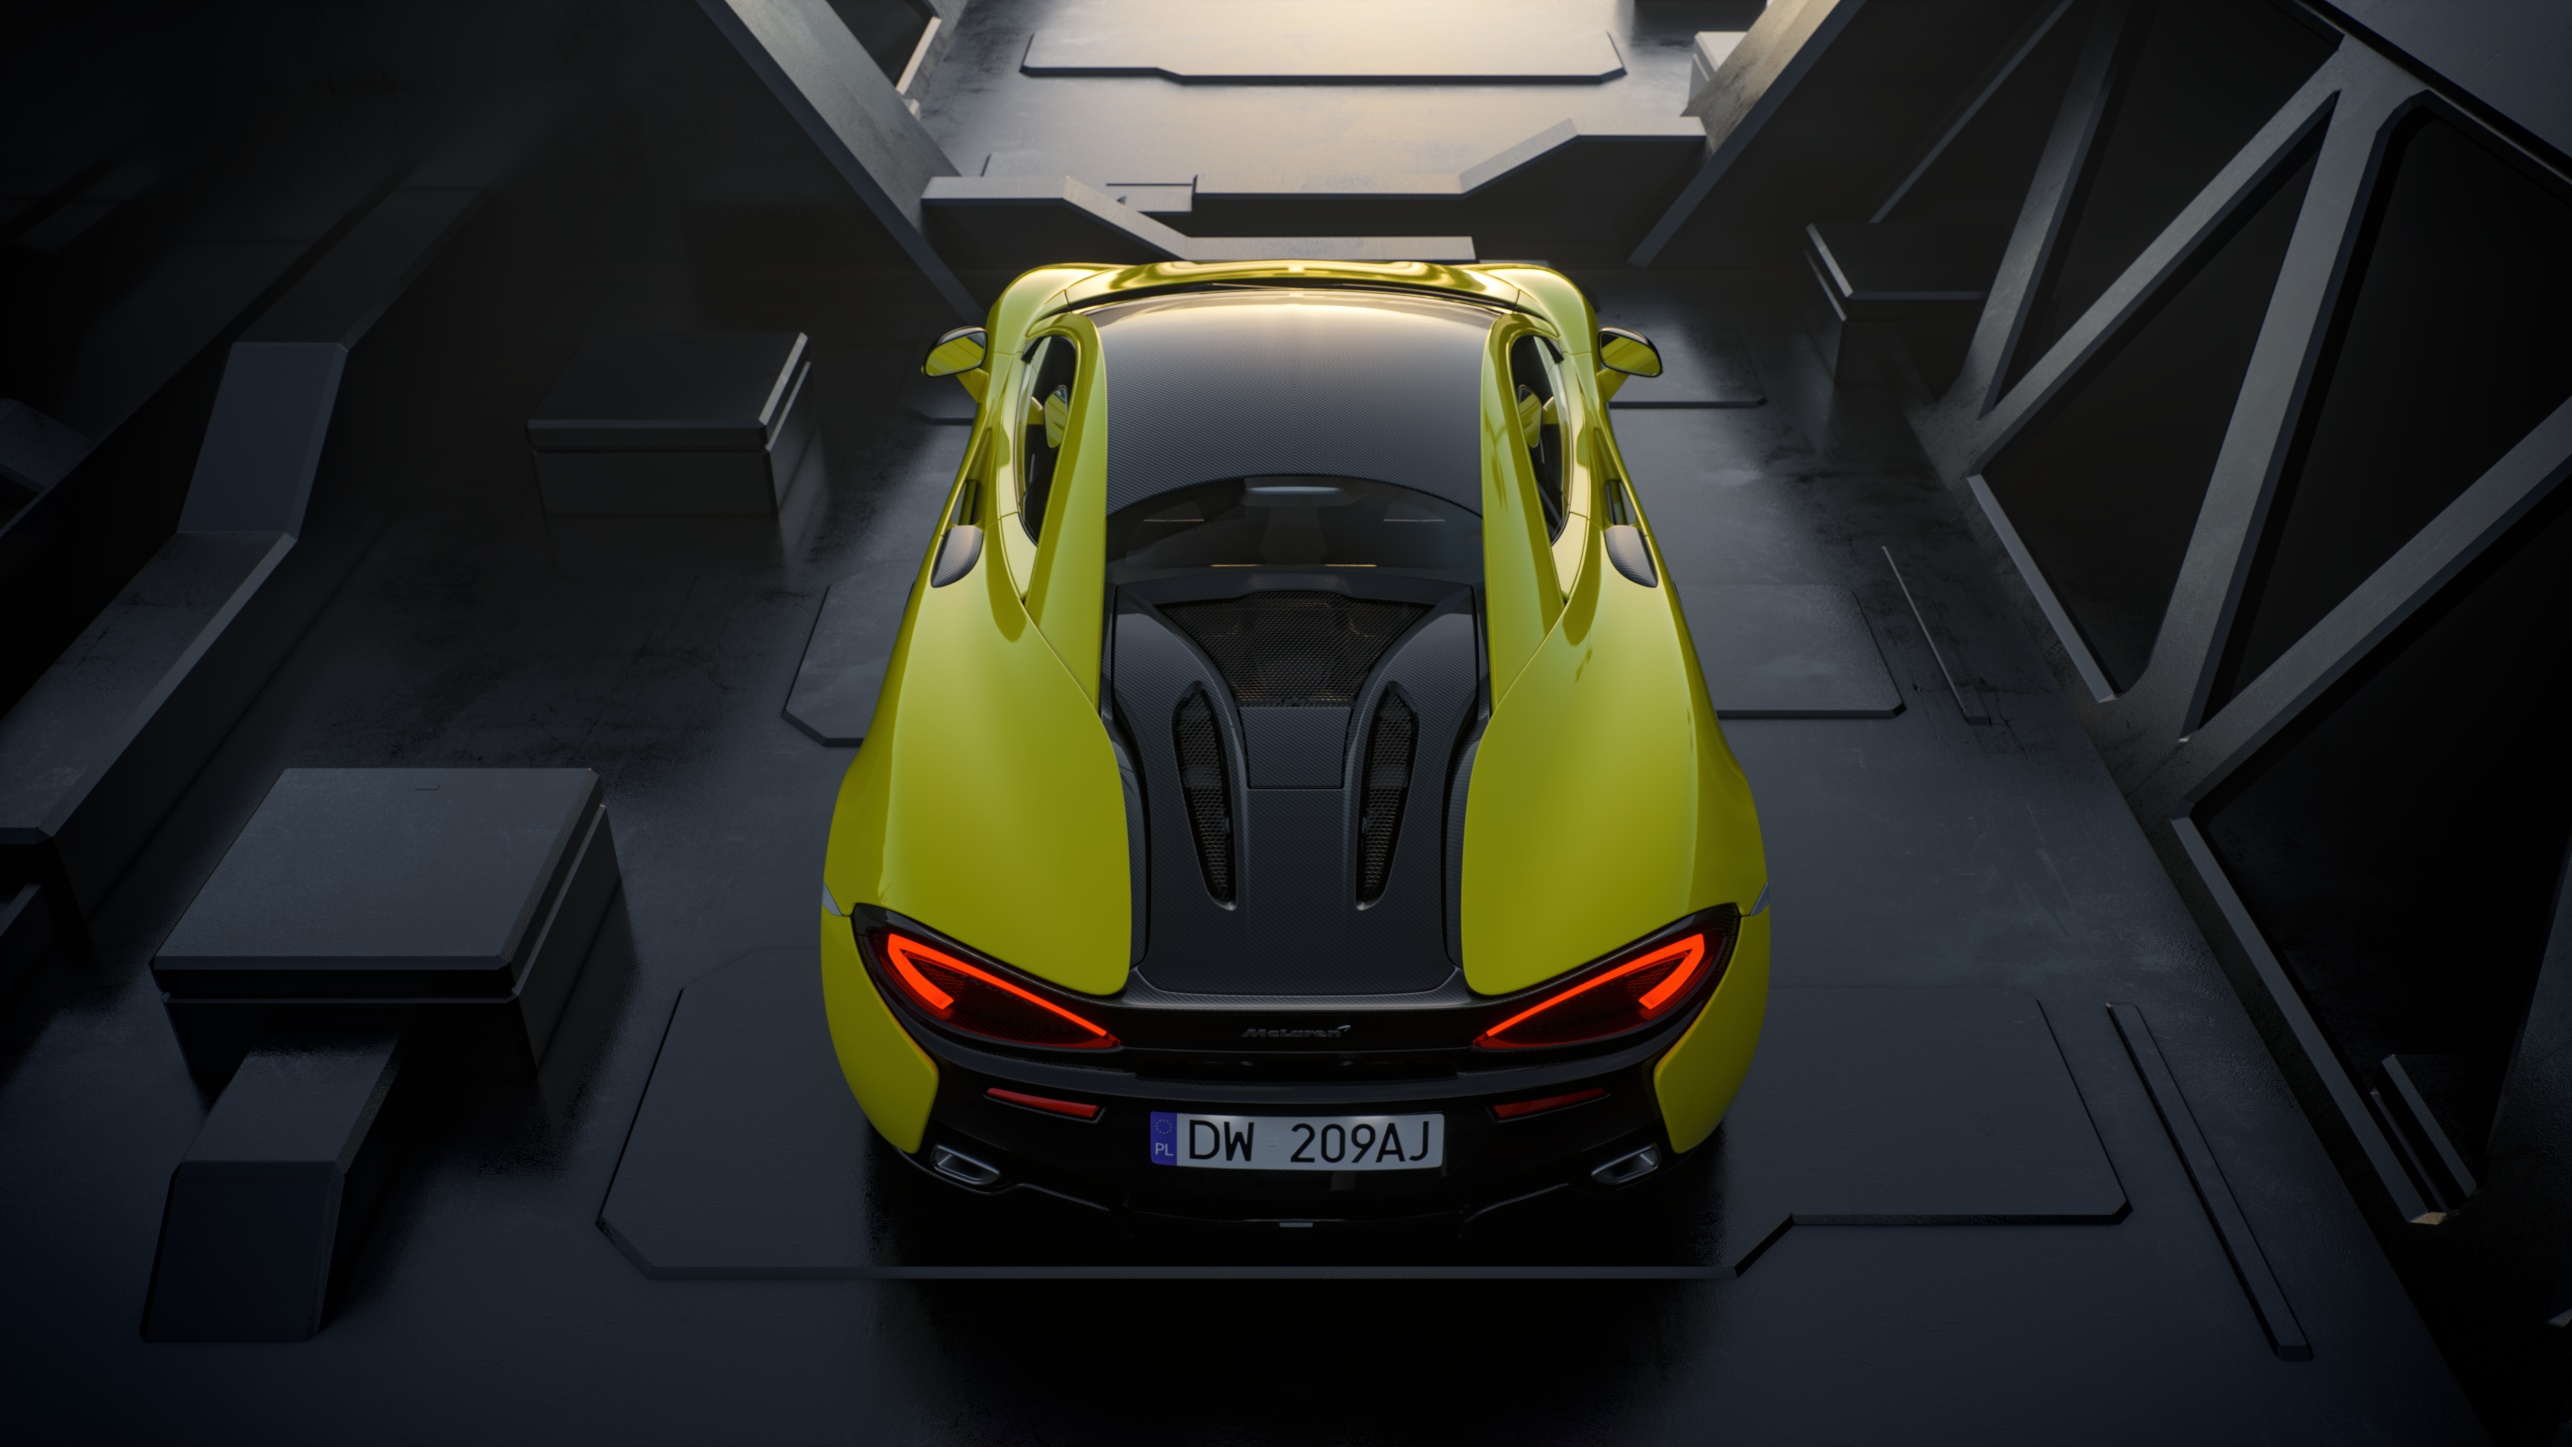 General 2572x1447 McLaren car supercars yellow cars vehicle numbers high angle British cars